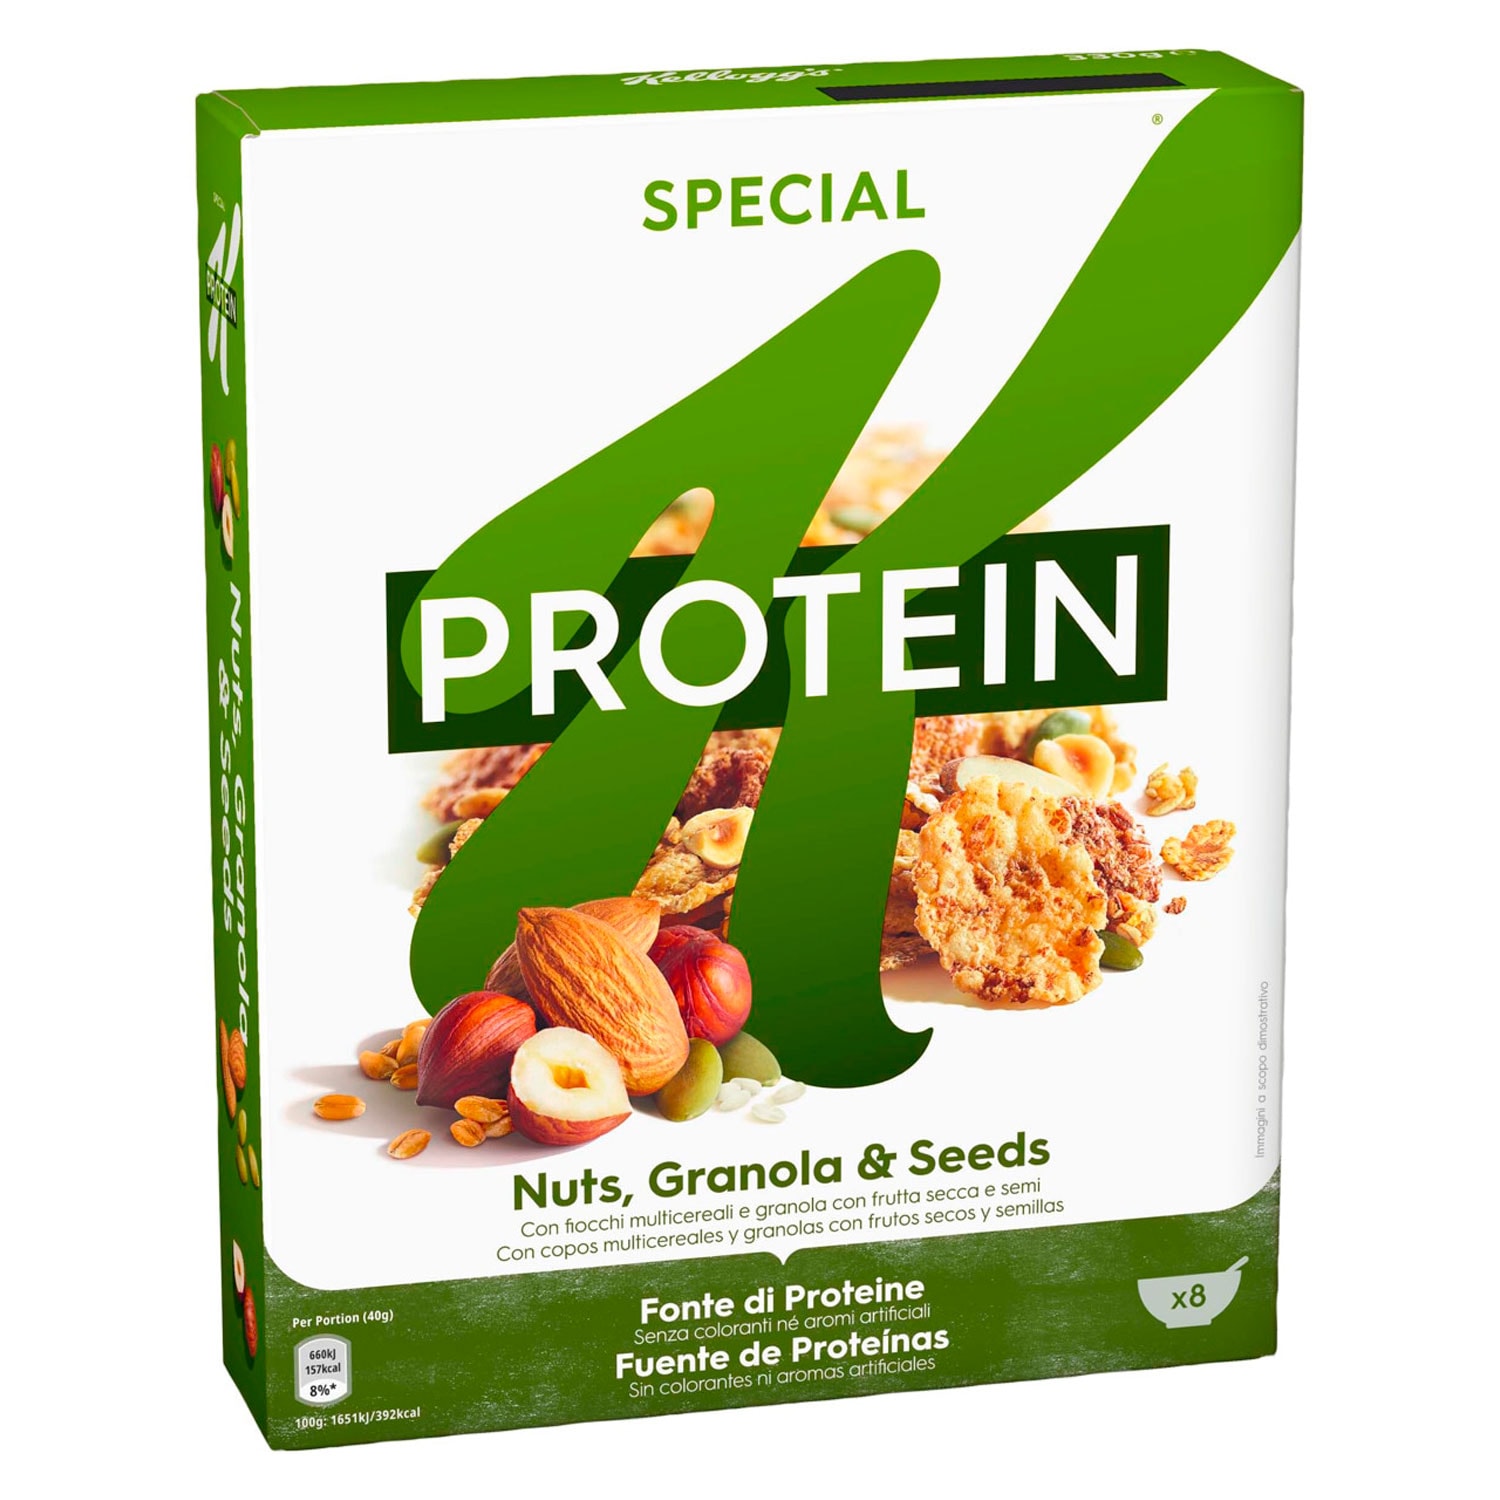 Kellogg's protein cereales & nuts, granola and seeds